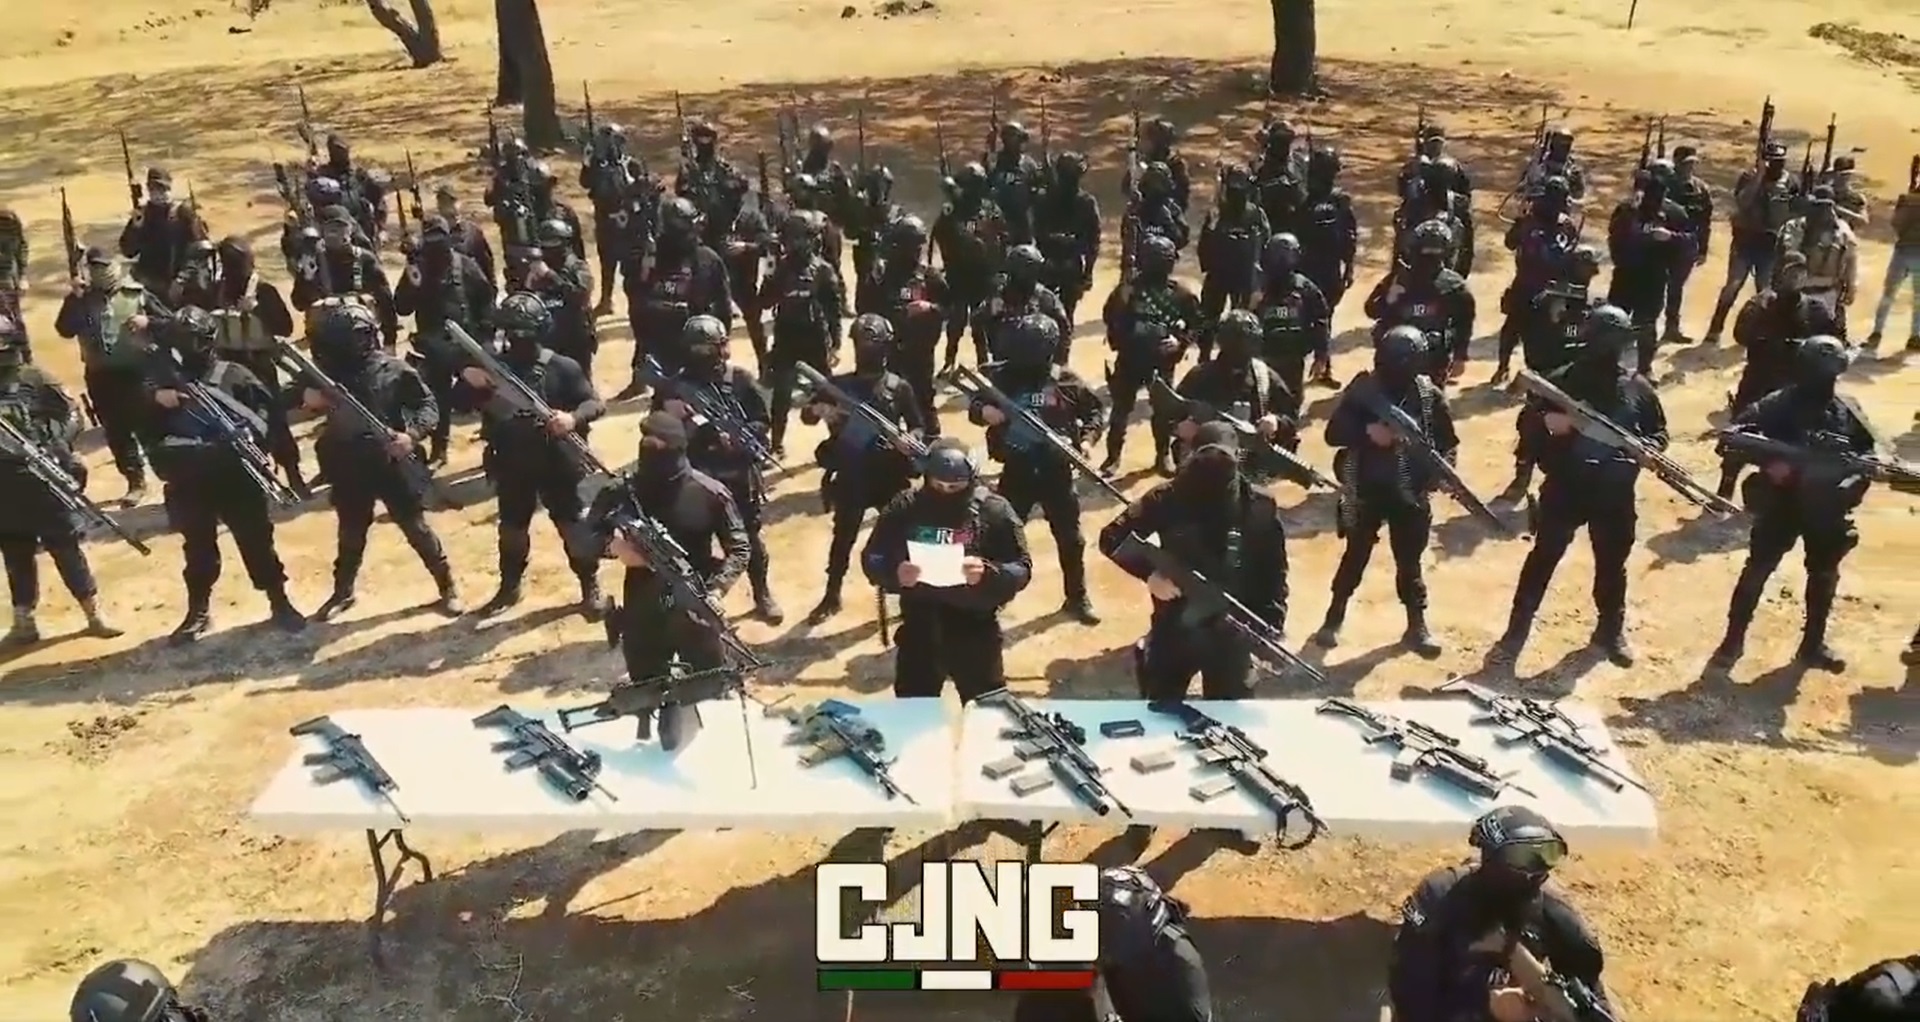 CJNG is the largest criminal organization in the country (Photo: Screenshot)